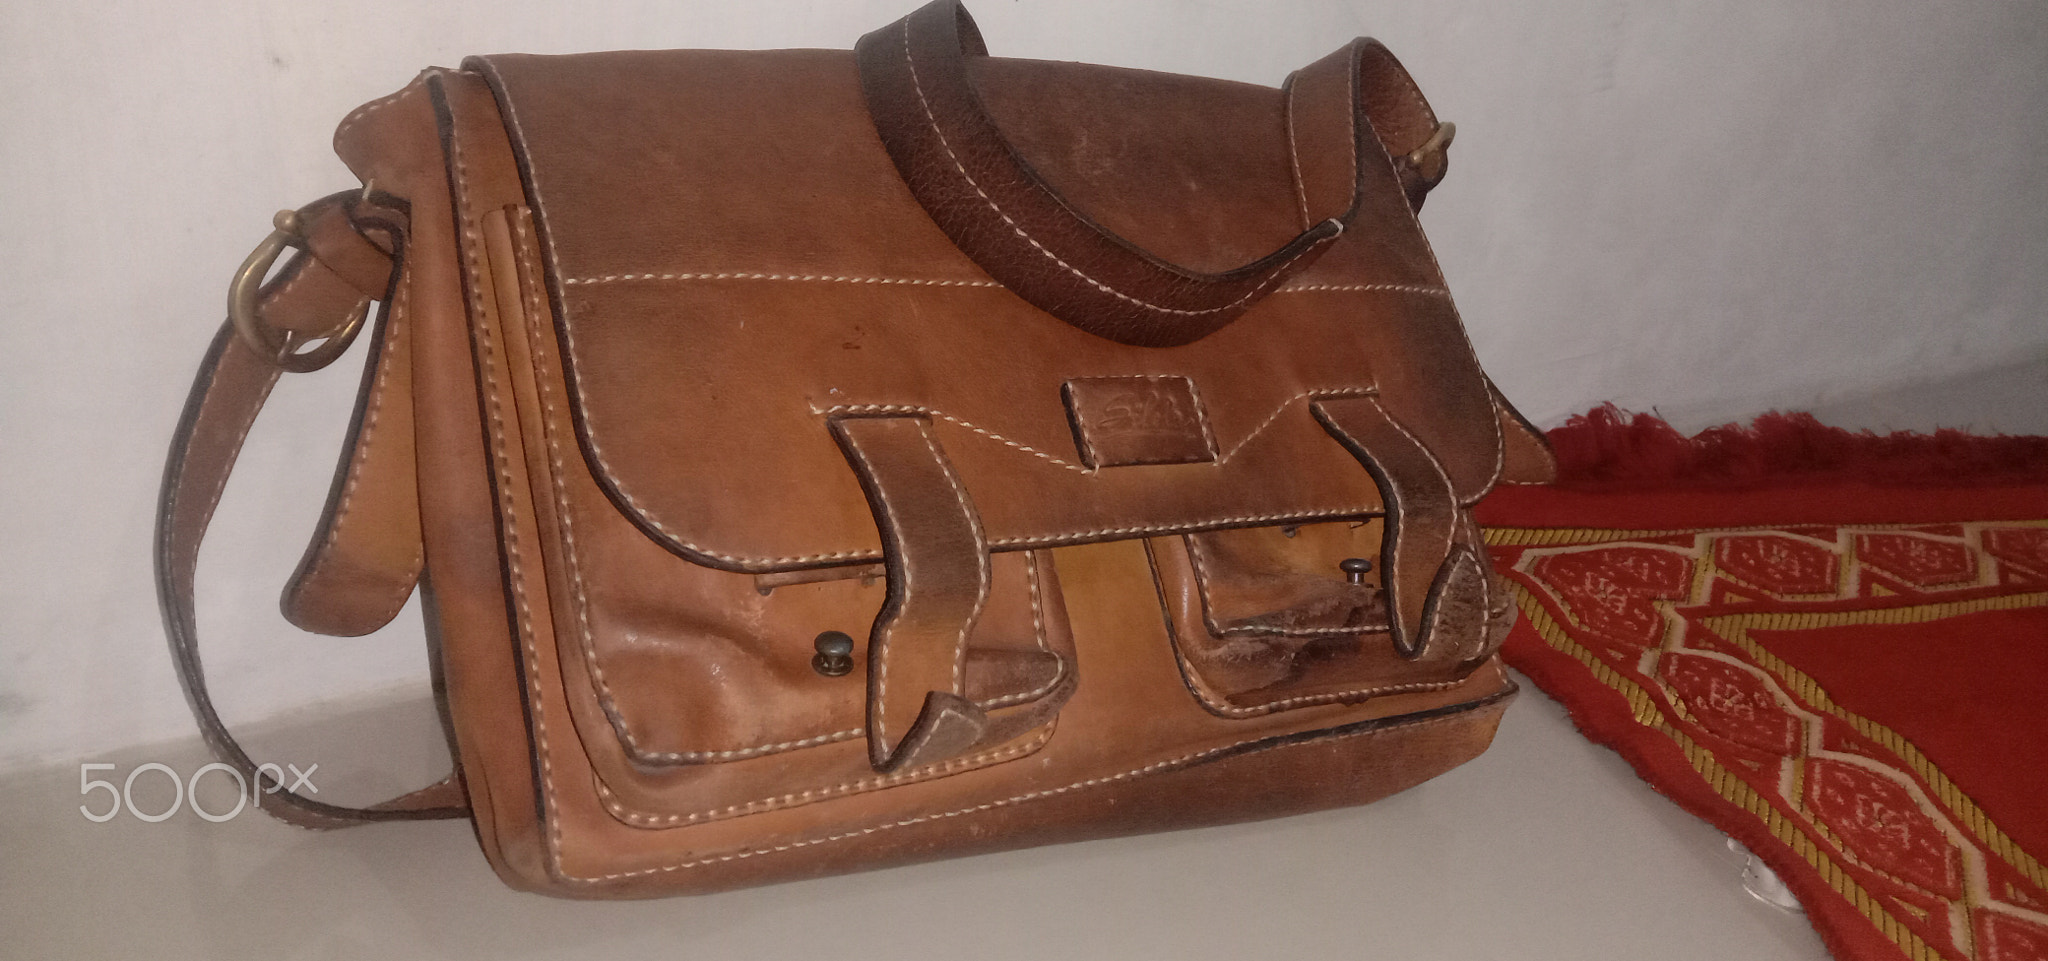 my bag leather